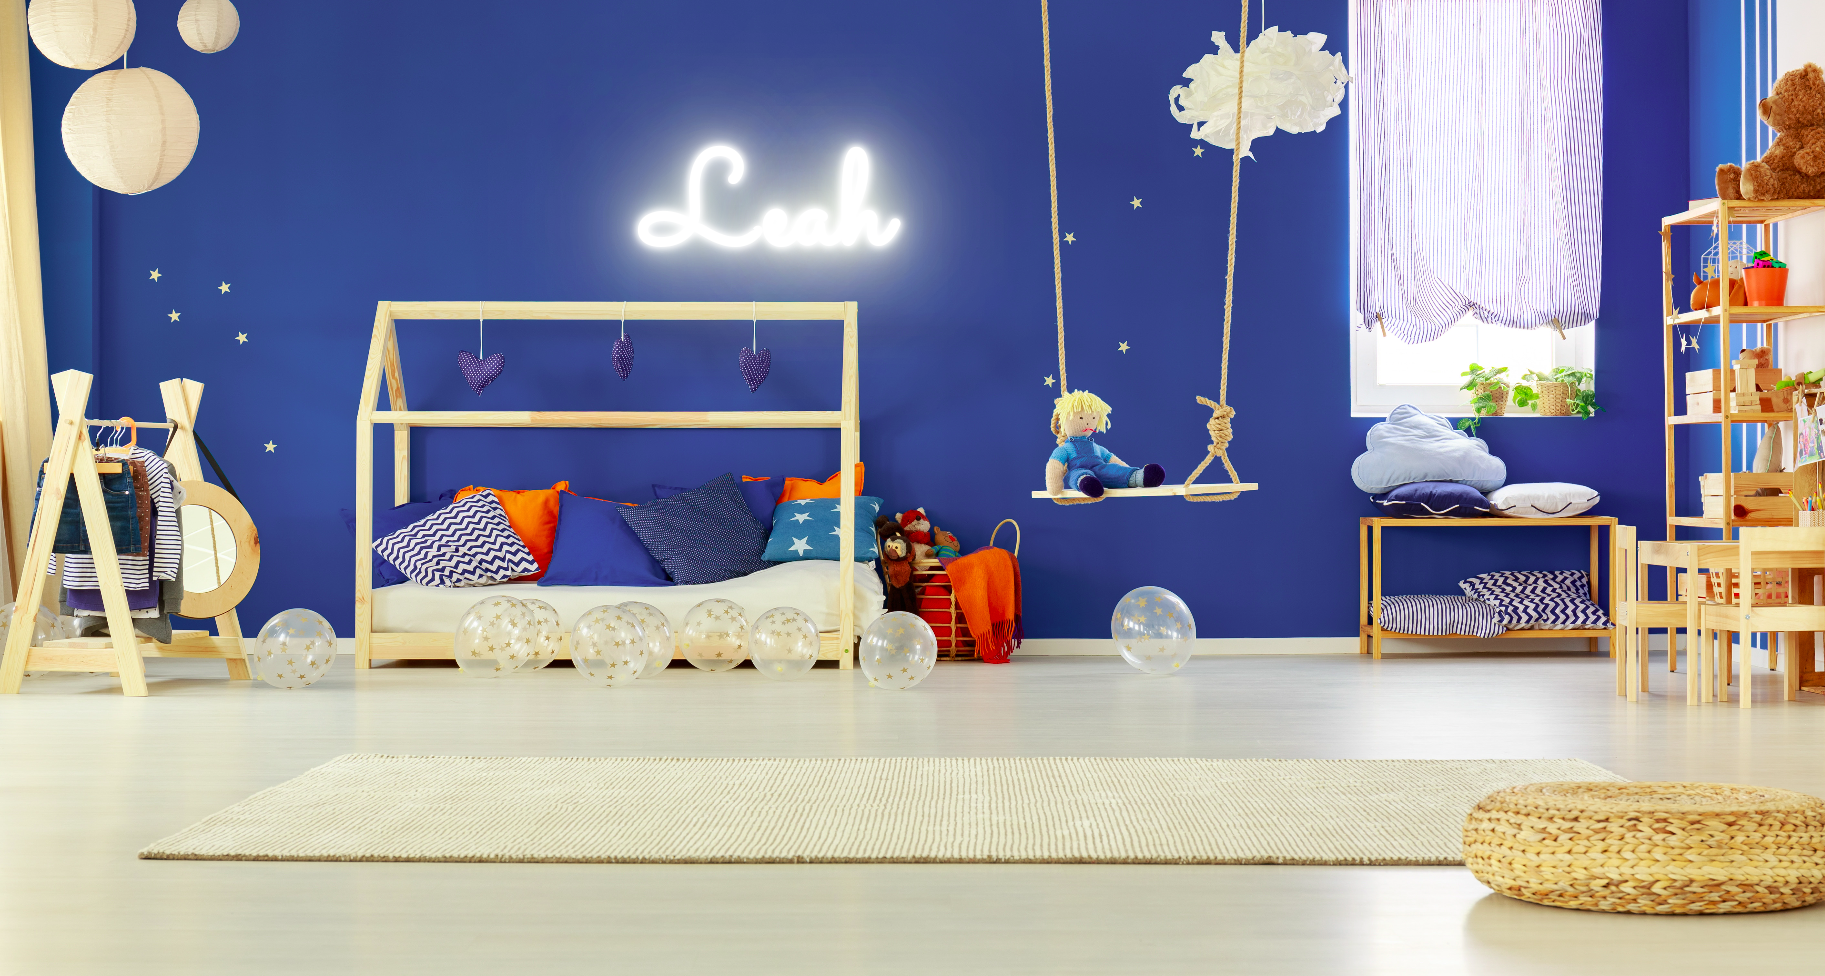 "Leah" Baby Name LED Neon Sign